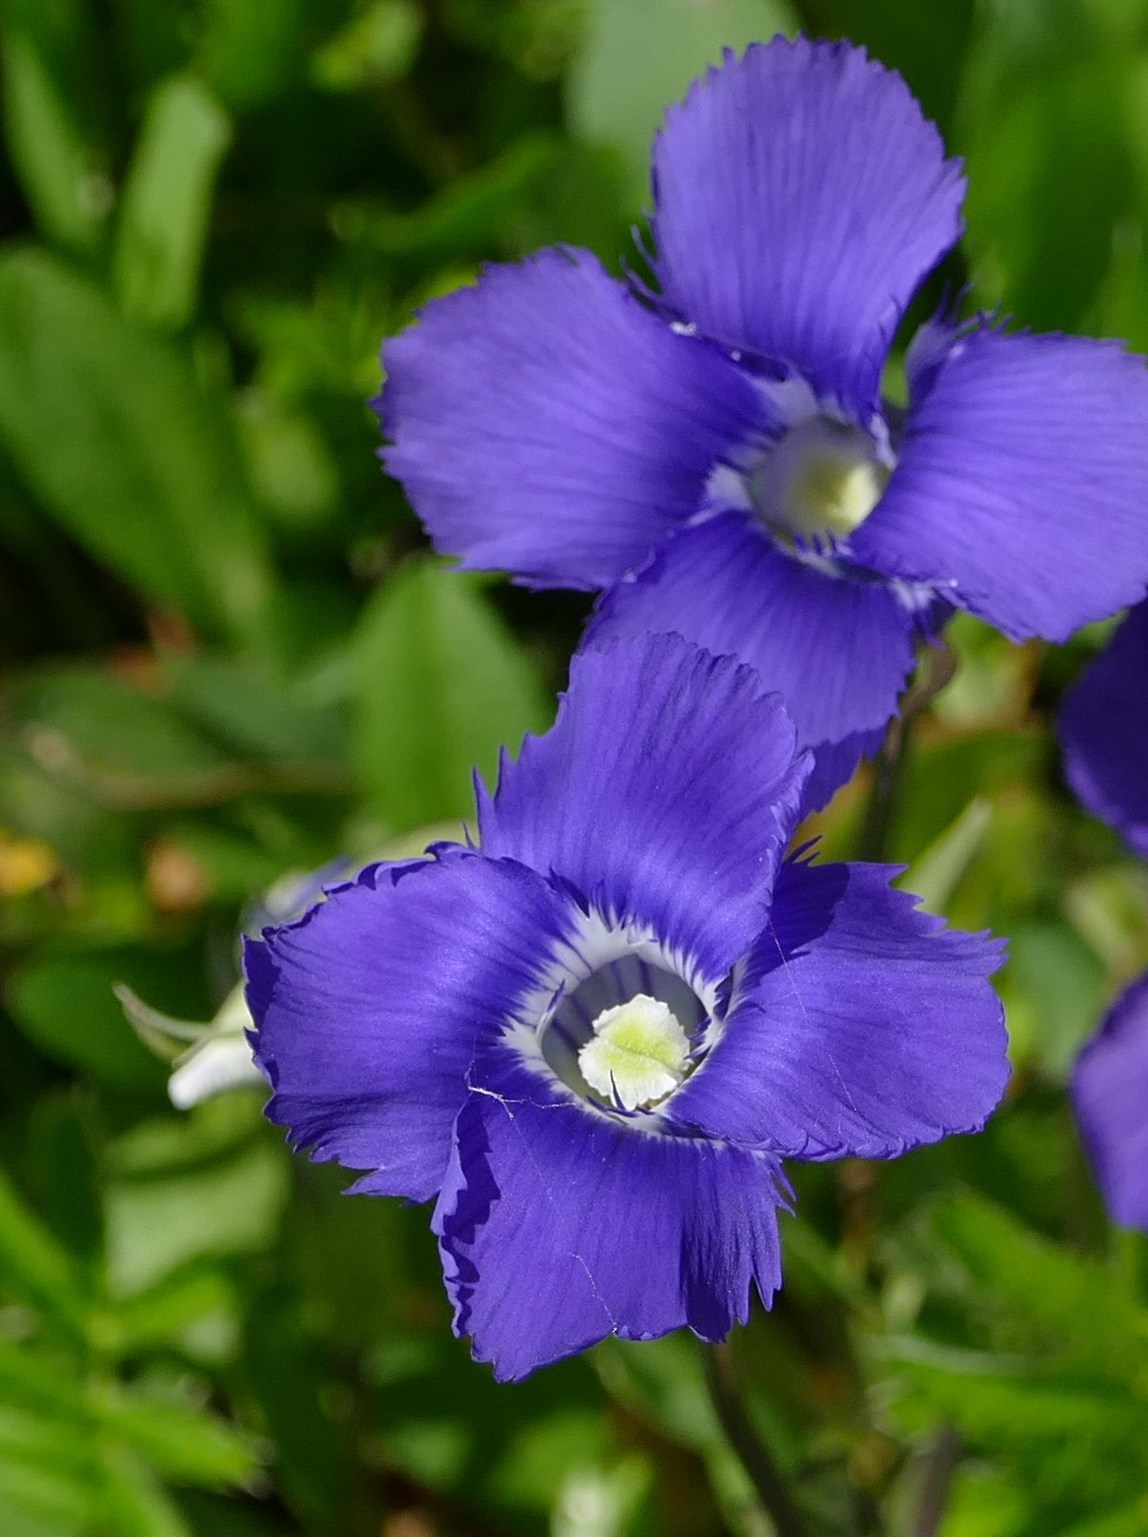 A closeup of the beautiful purple flower of the fringed gentian